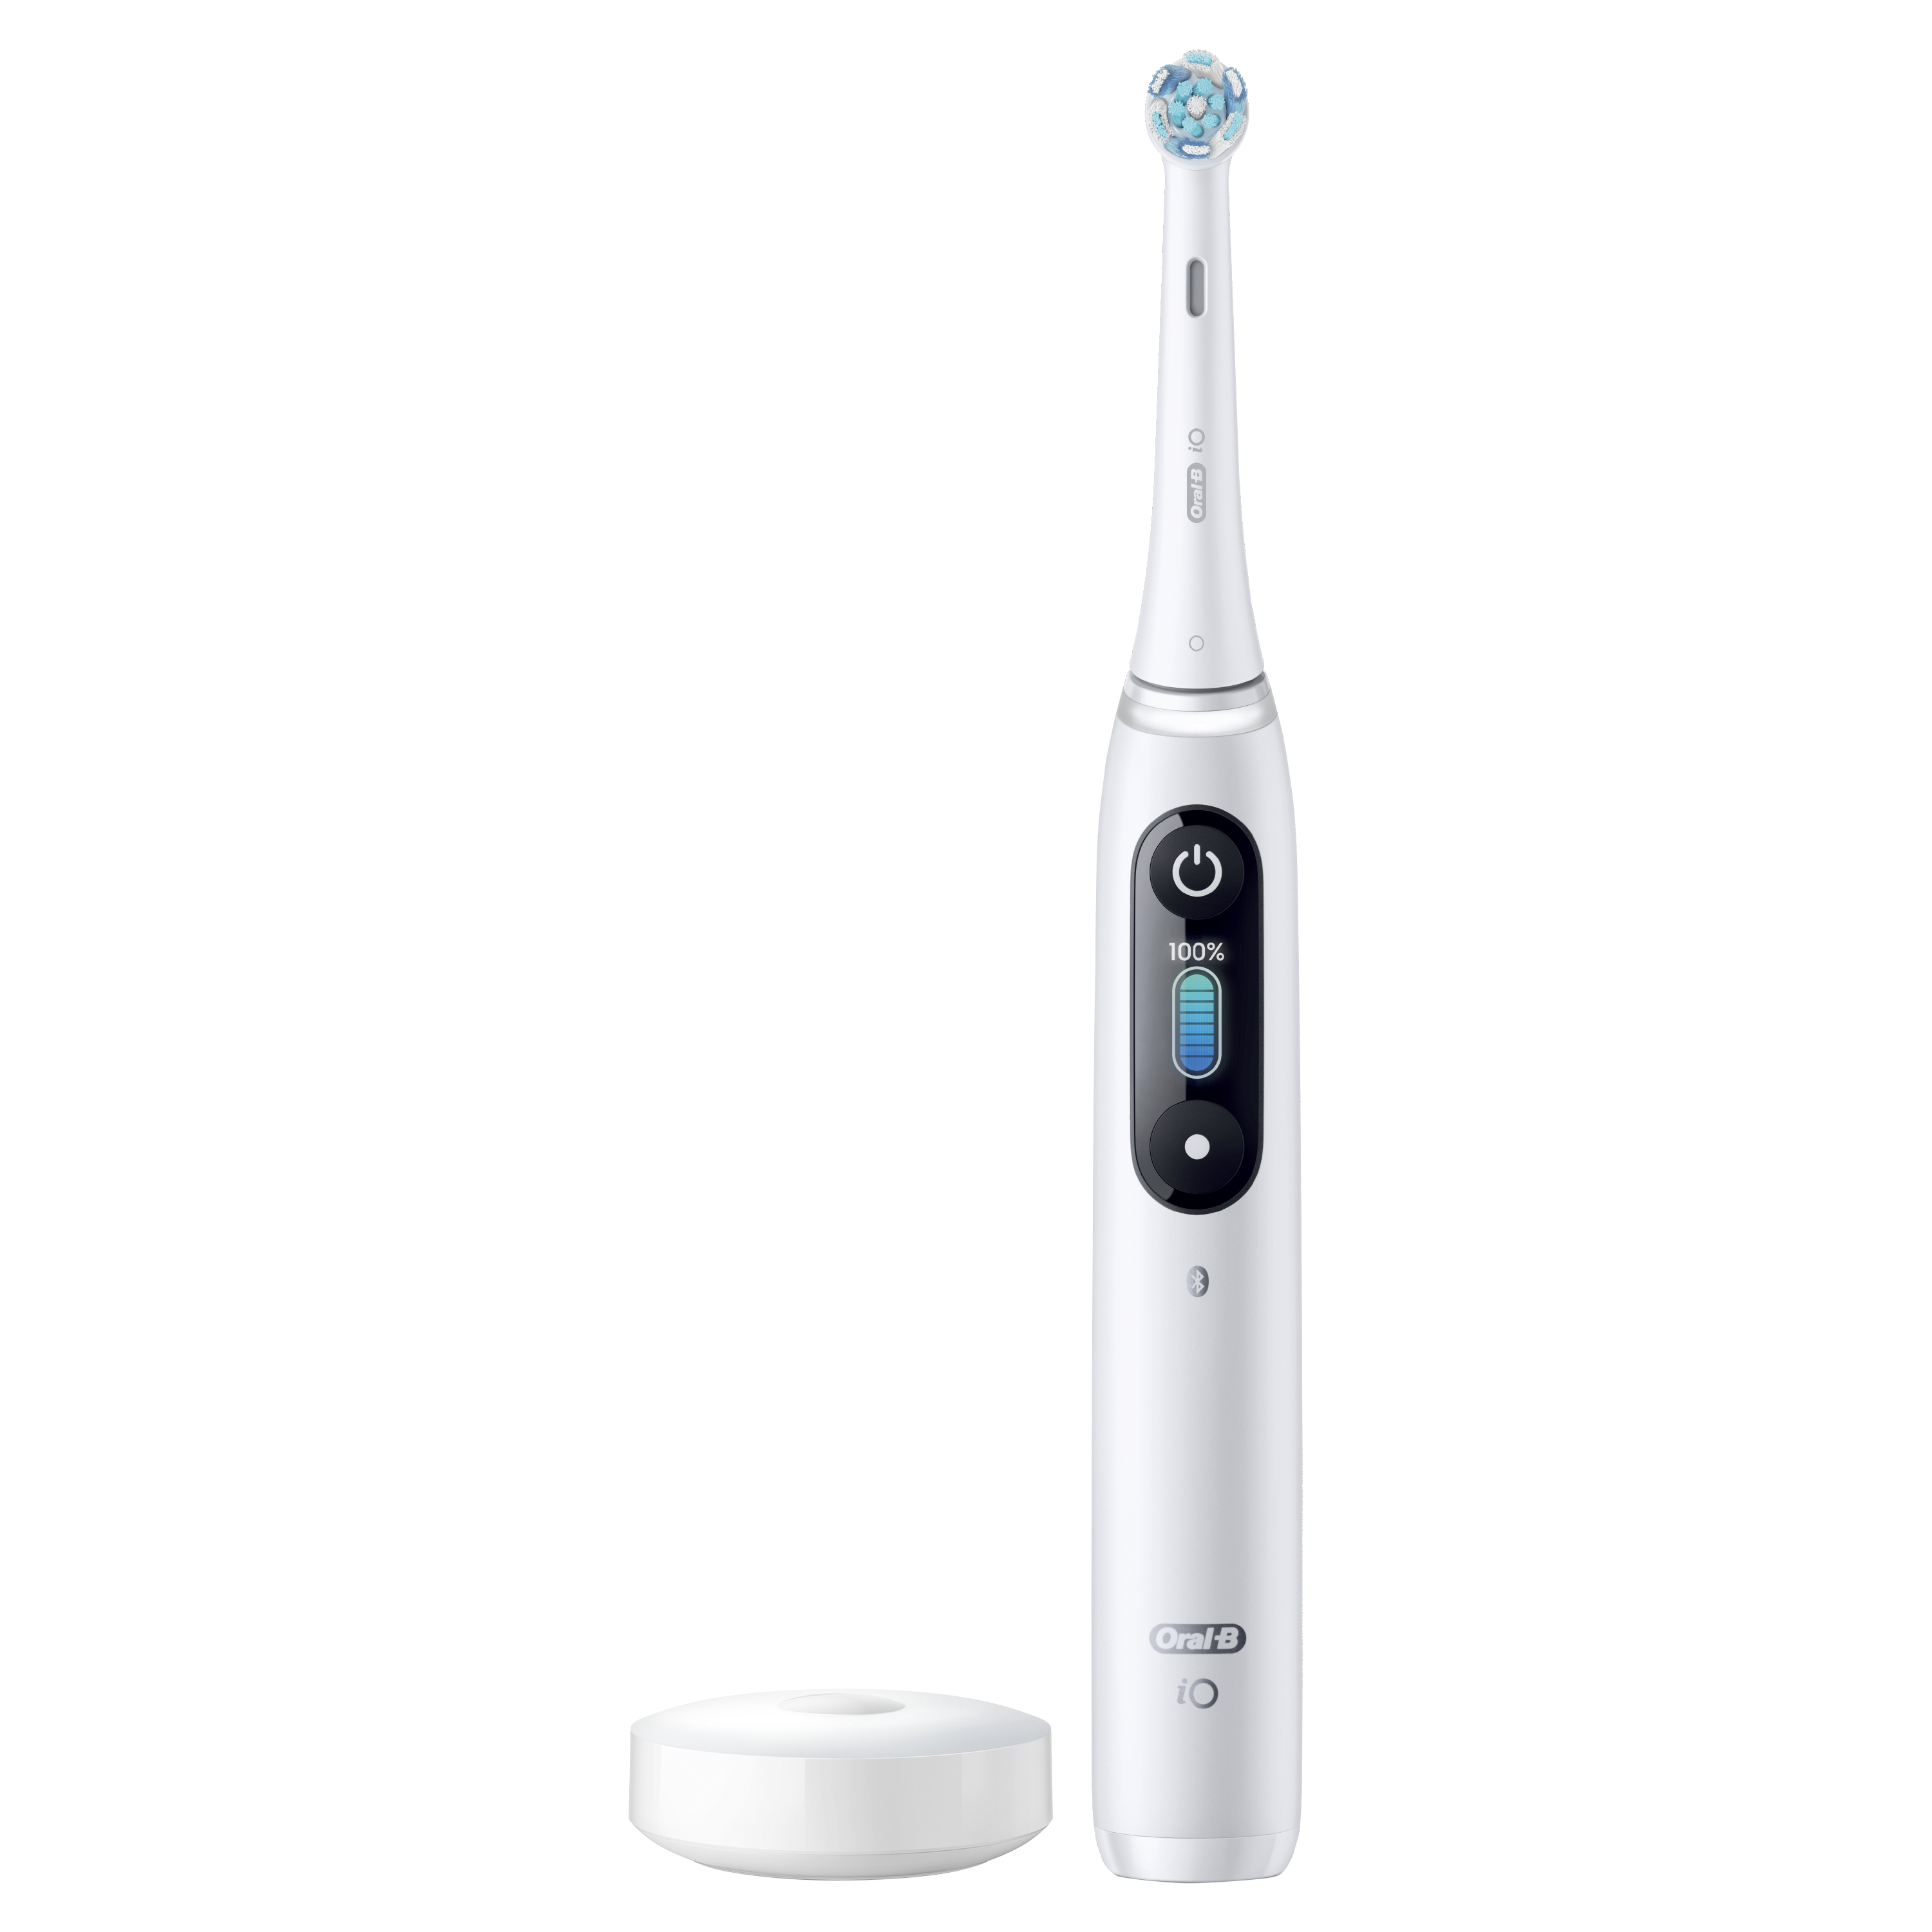 crest-oral-b-io-transformational-gum-health-electric-toothbrush-system